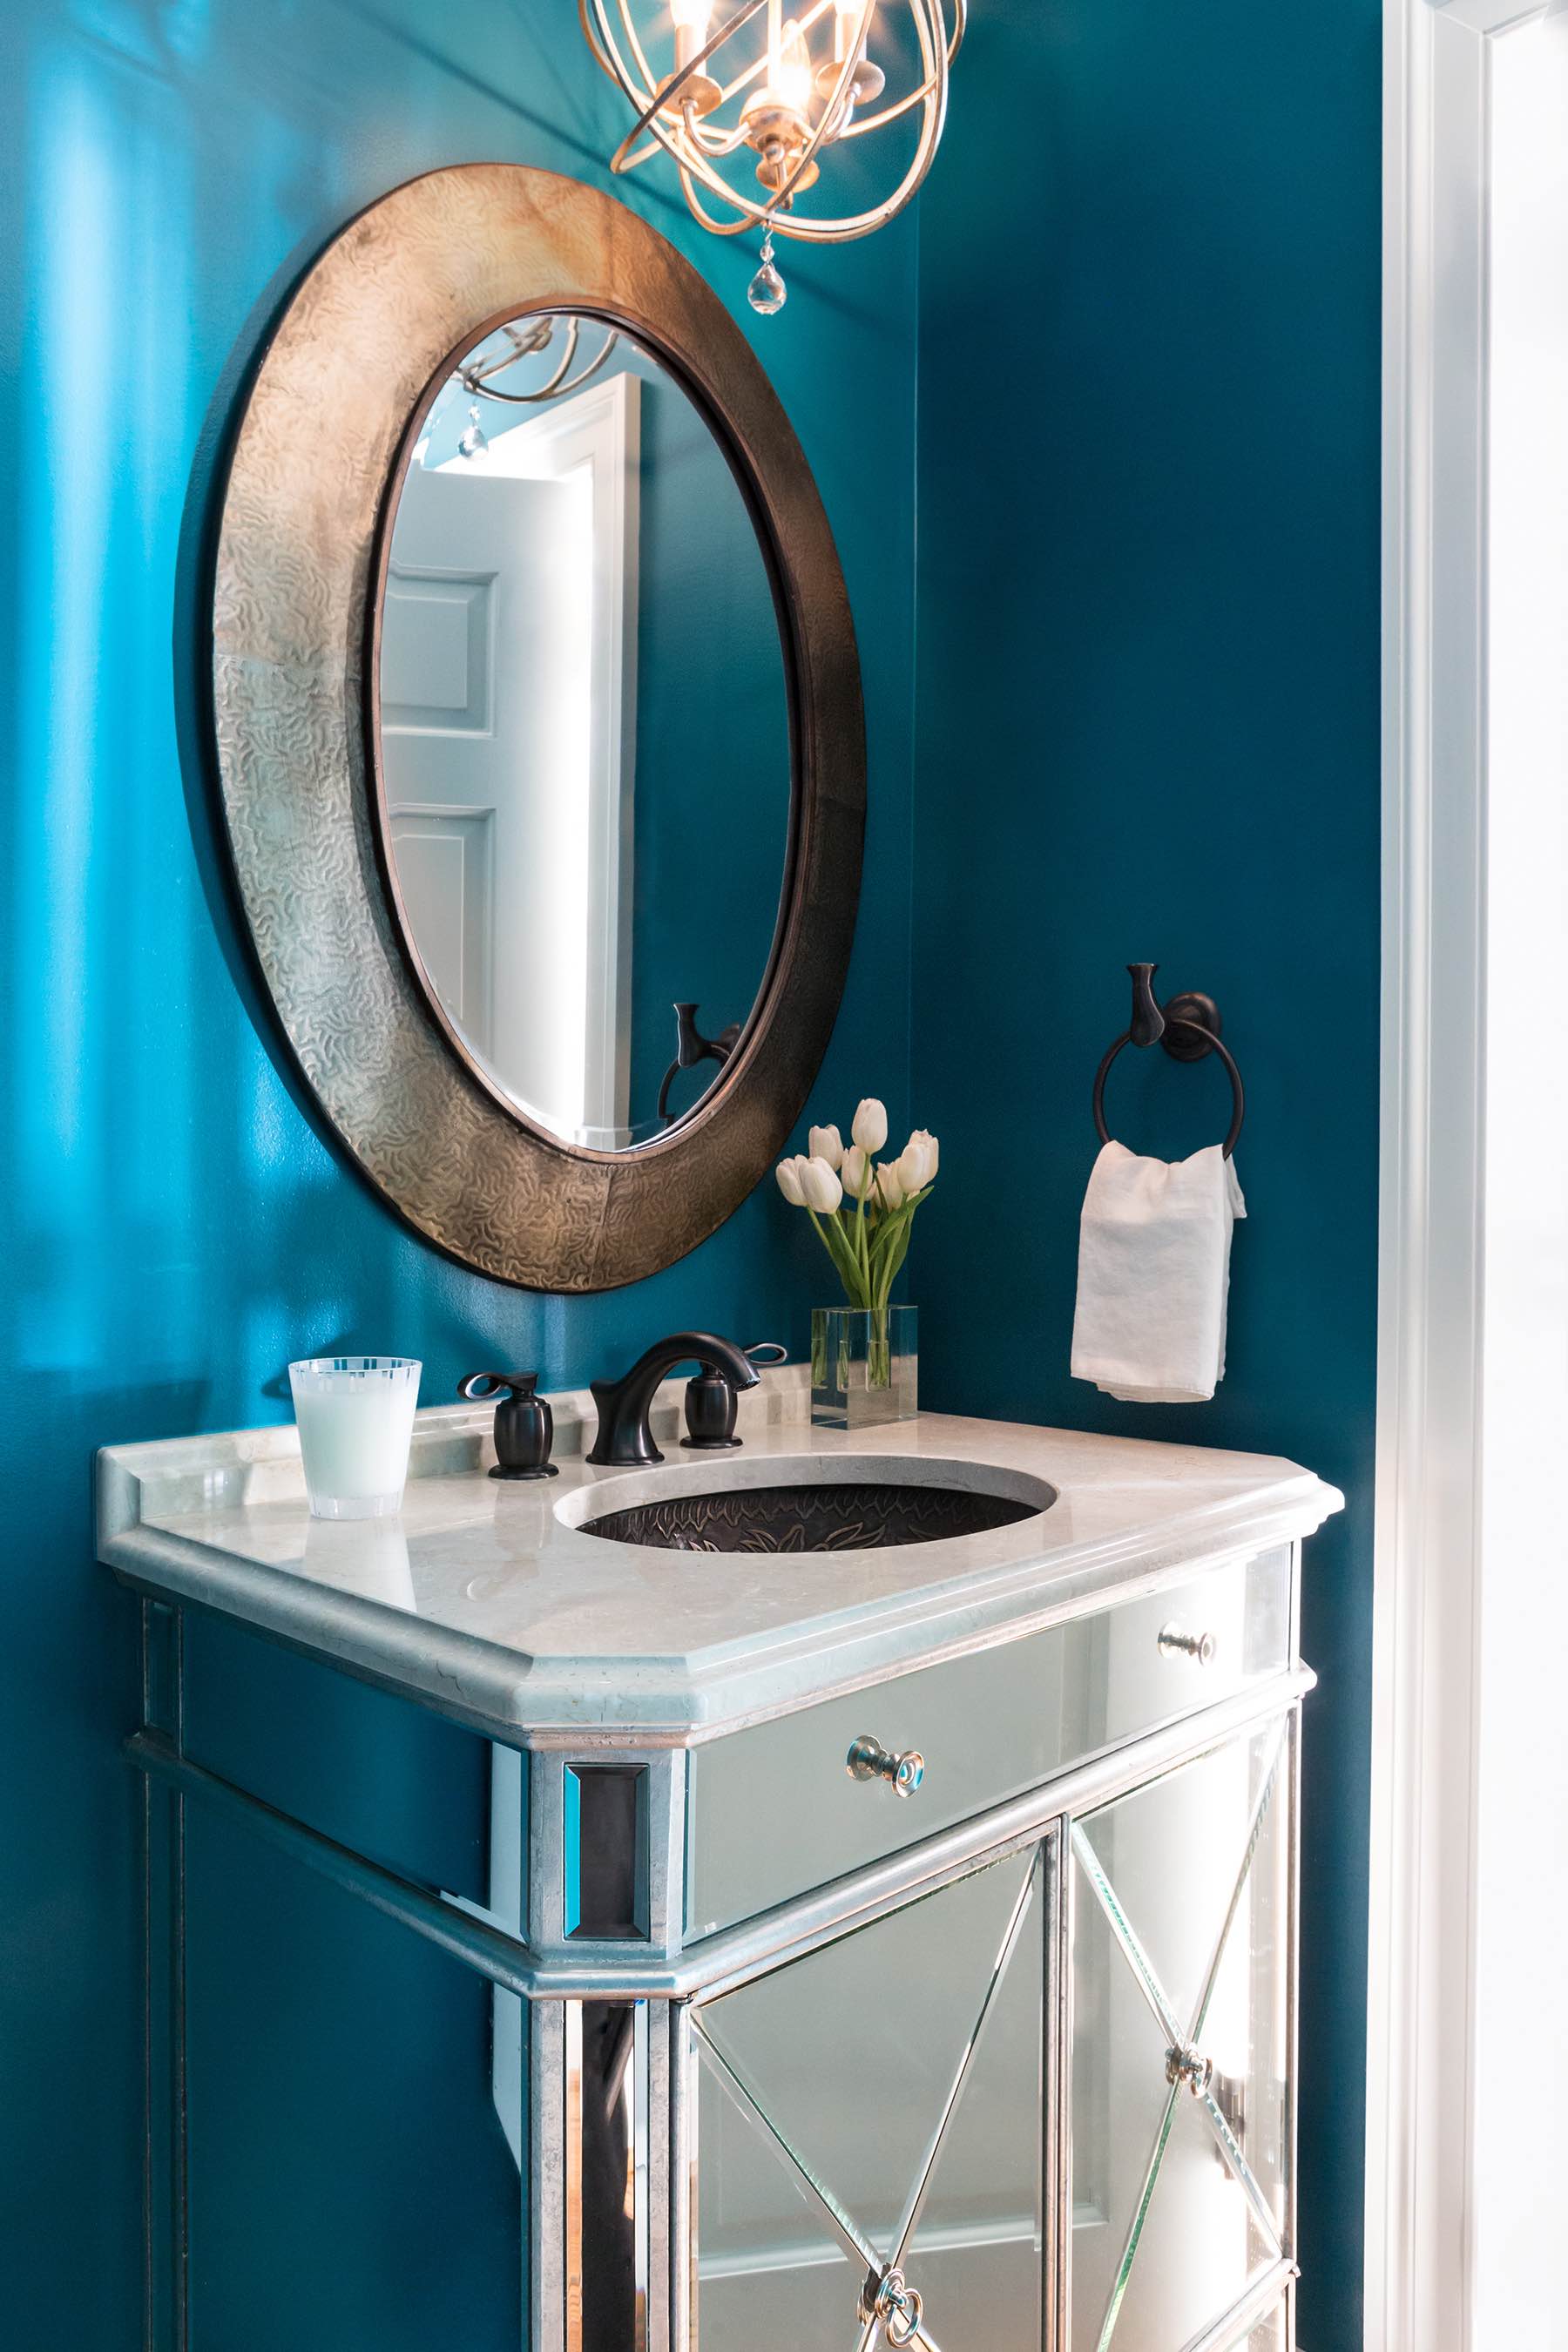 Powder room vanity with mirrored cabinets, teal high-gloss paint, marble vanity top, antiqued gold porthole mirror